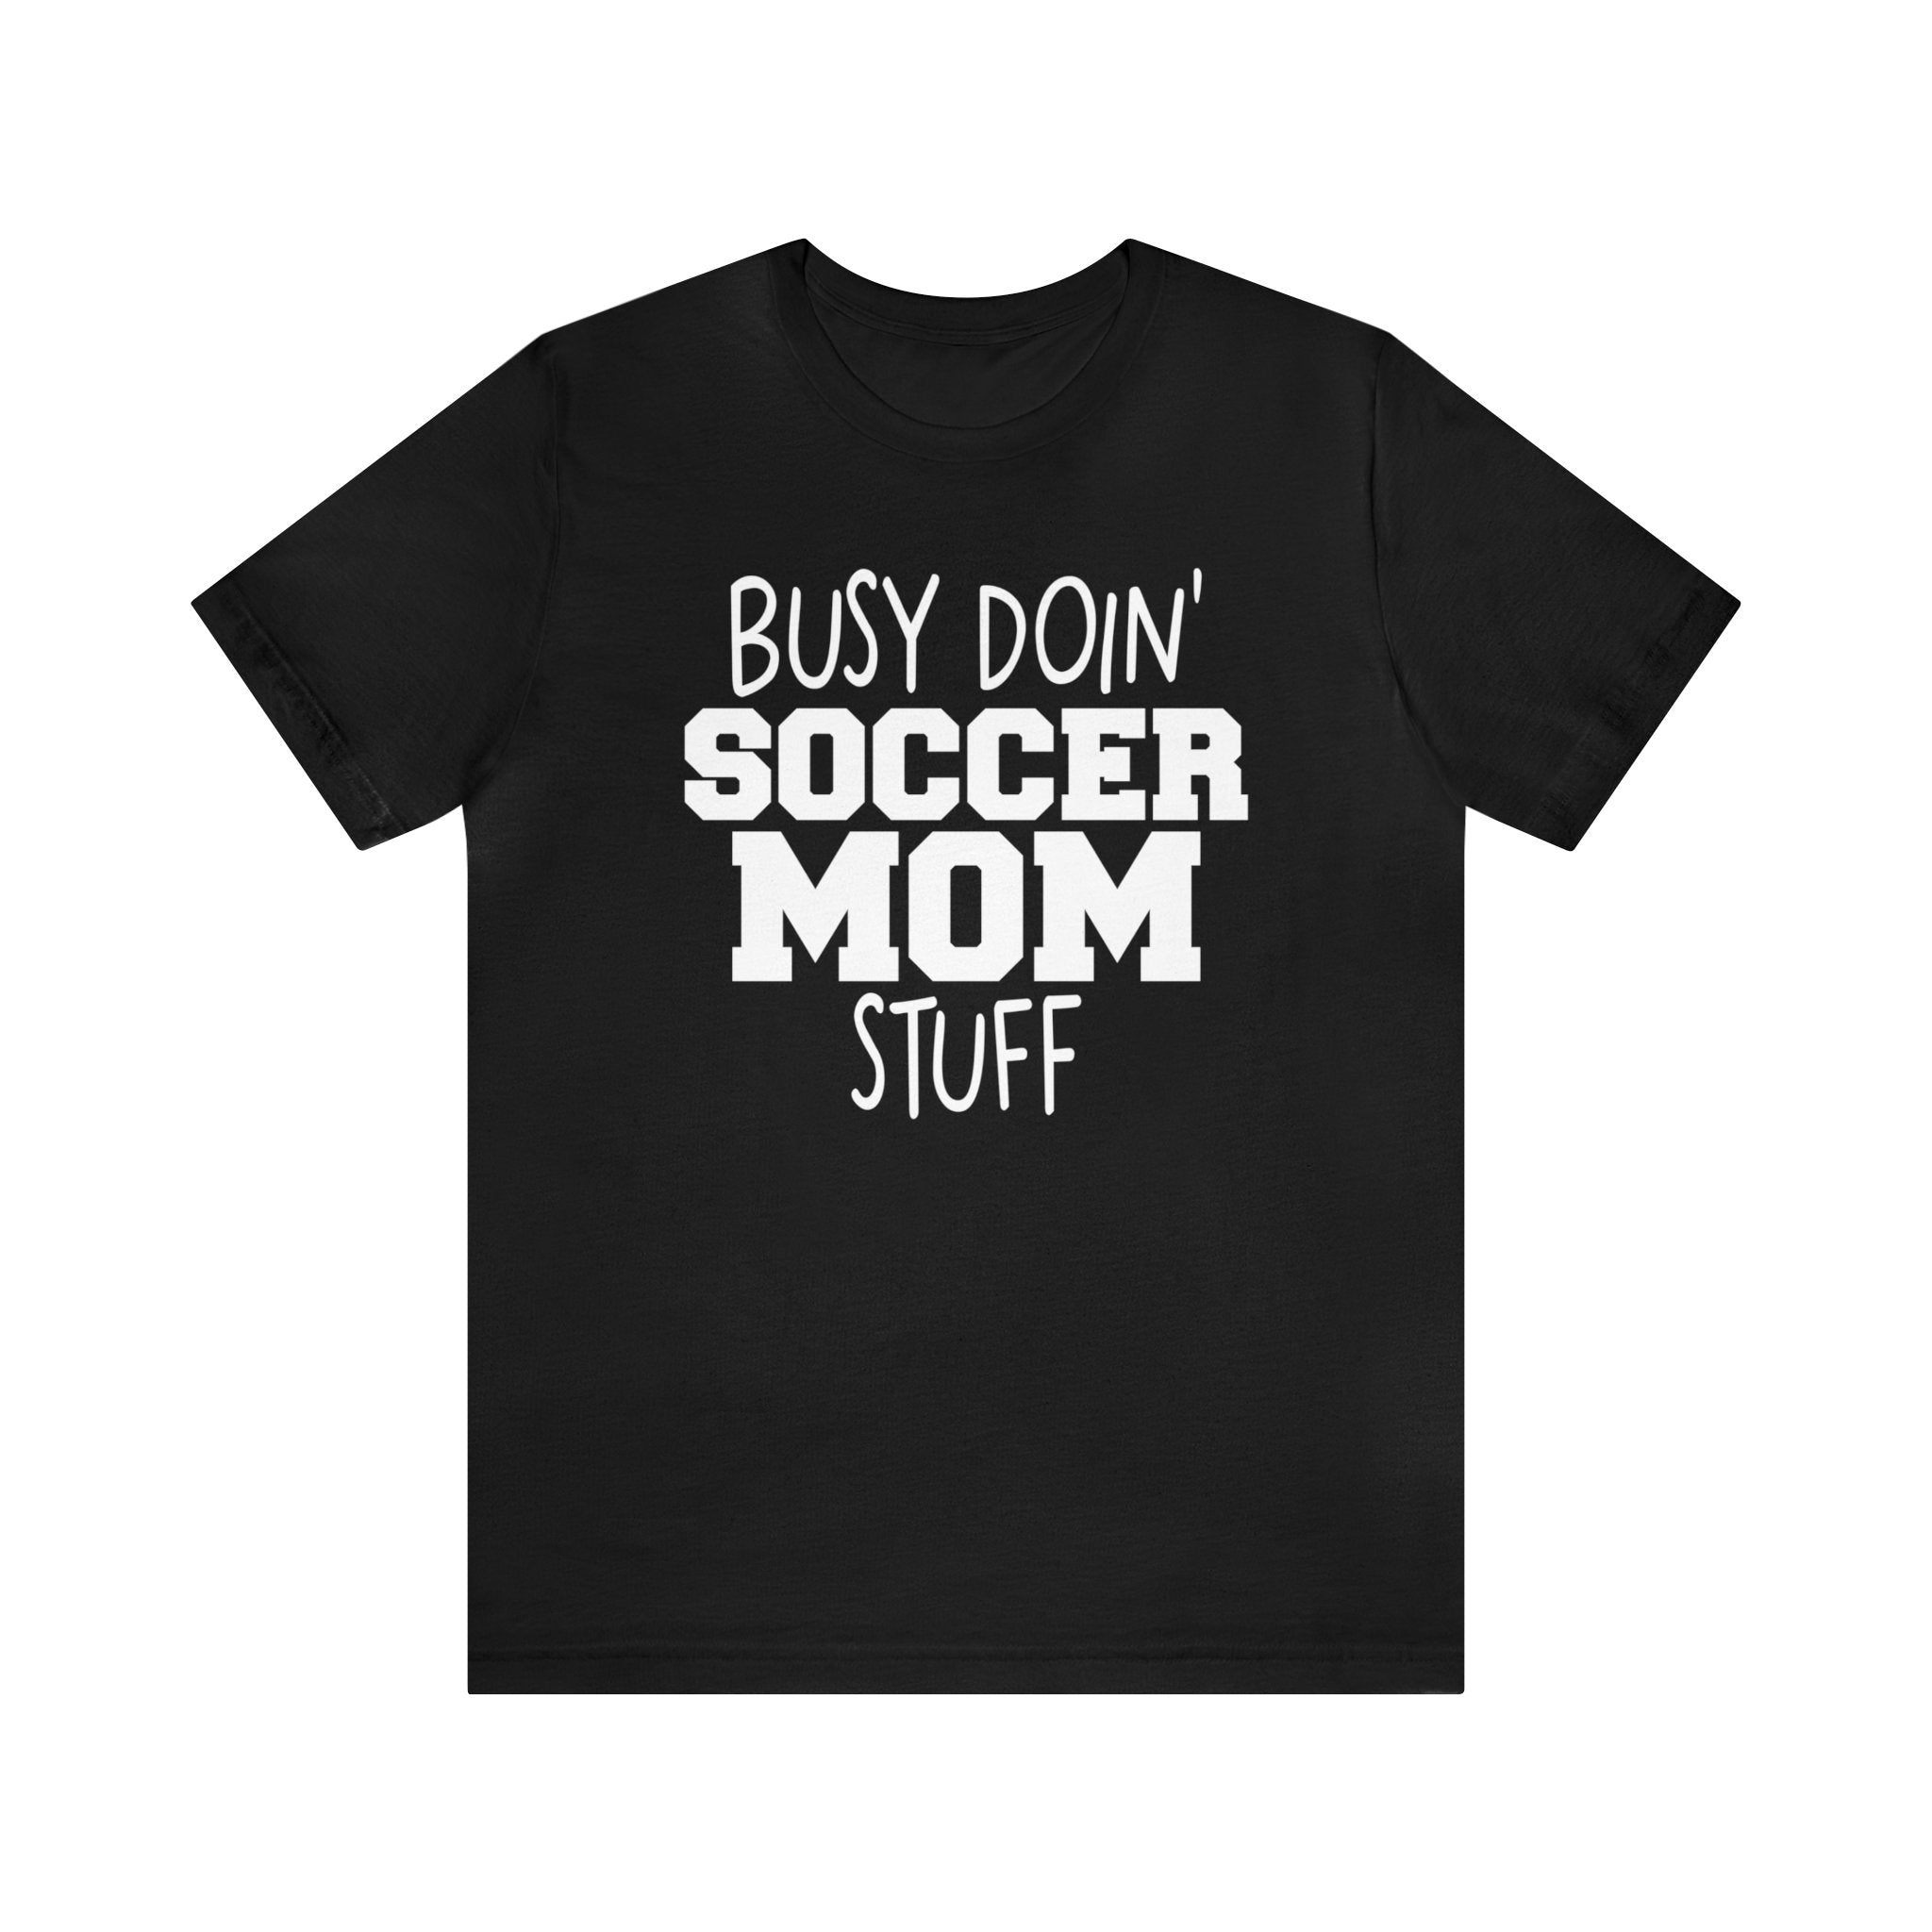 Busy Doin' Soccer Mom Stuff Adult Unisex Jersey Short Sleeve Tee | Game Day Shirt | Funny Soccer Mama Shirts